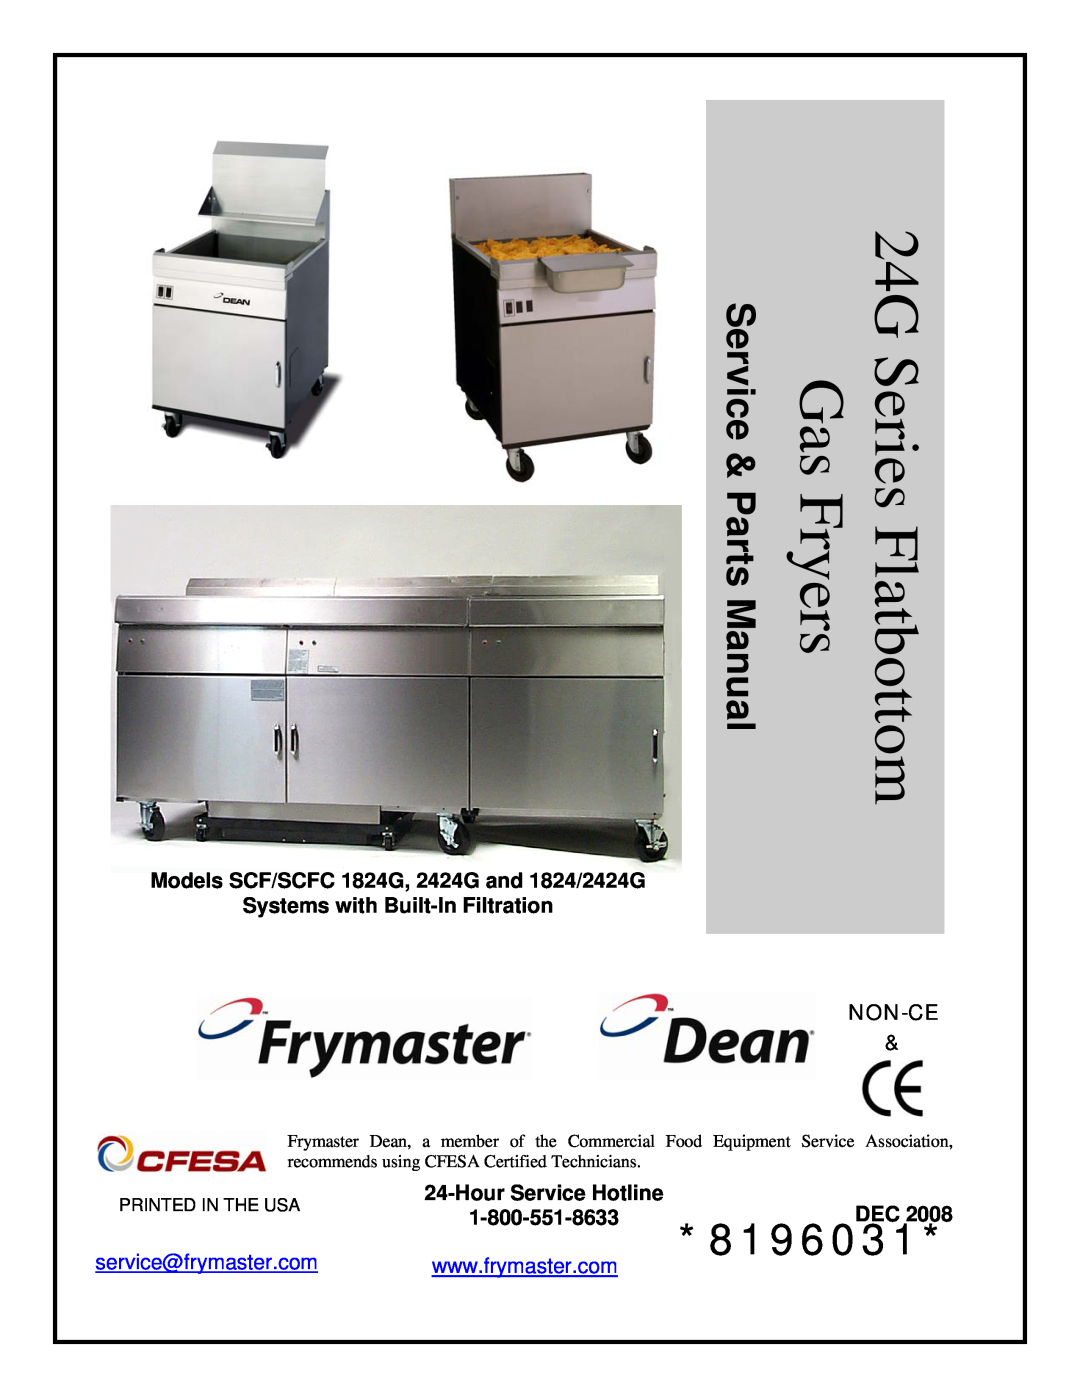 Frymaster manual Models SCF/SCFC 1824G, 2424G and 1824/2424G, Systems with Built-In Filtration NON-CE, 8196031 